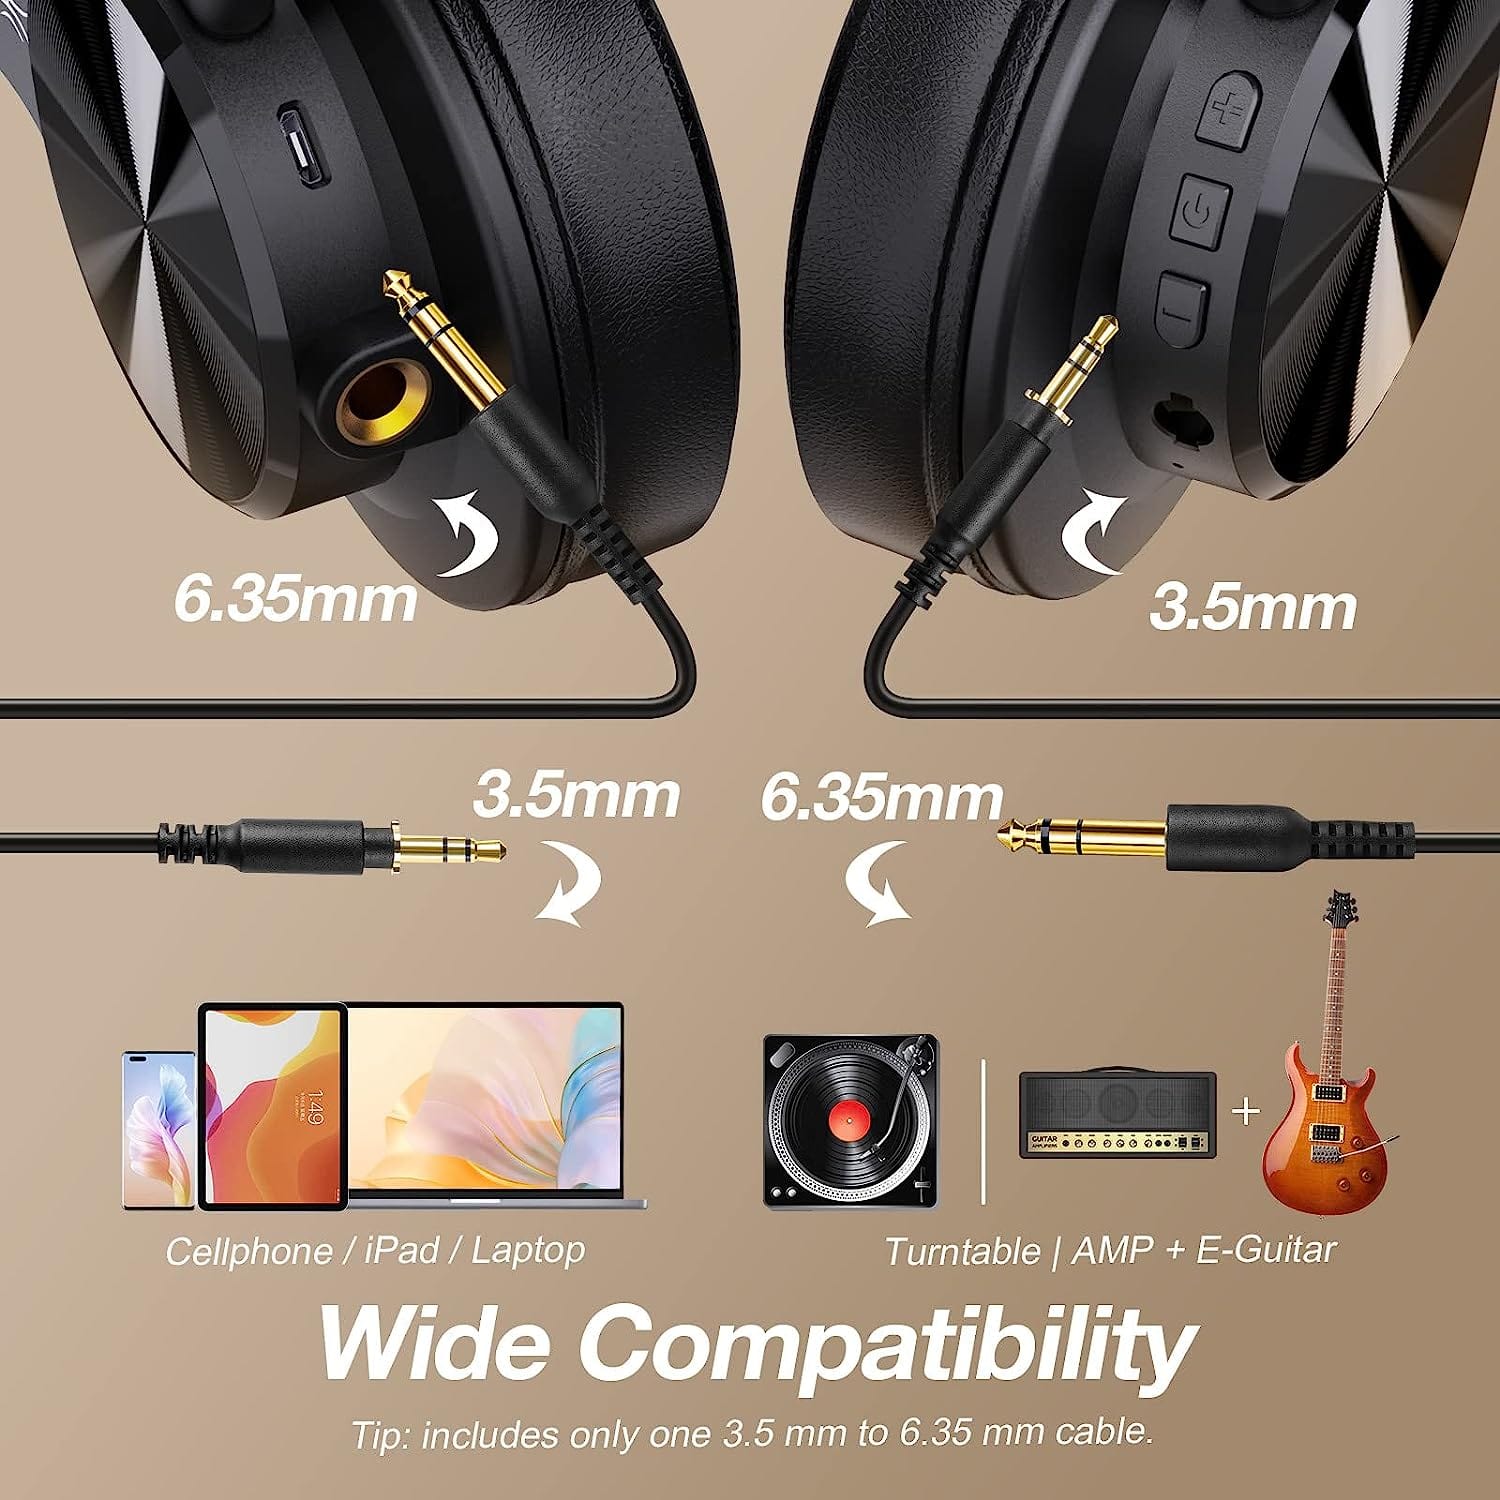 OneOdio Oneodio Wireless Headphone, Version A70, Supports Bluetooth 5.2, Playtime up to 72 Hours, Color Black Gold